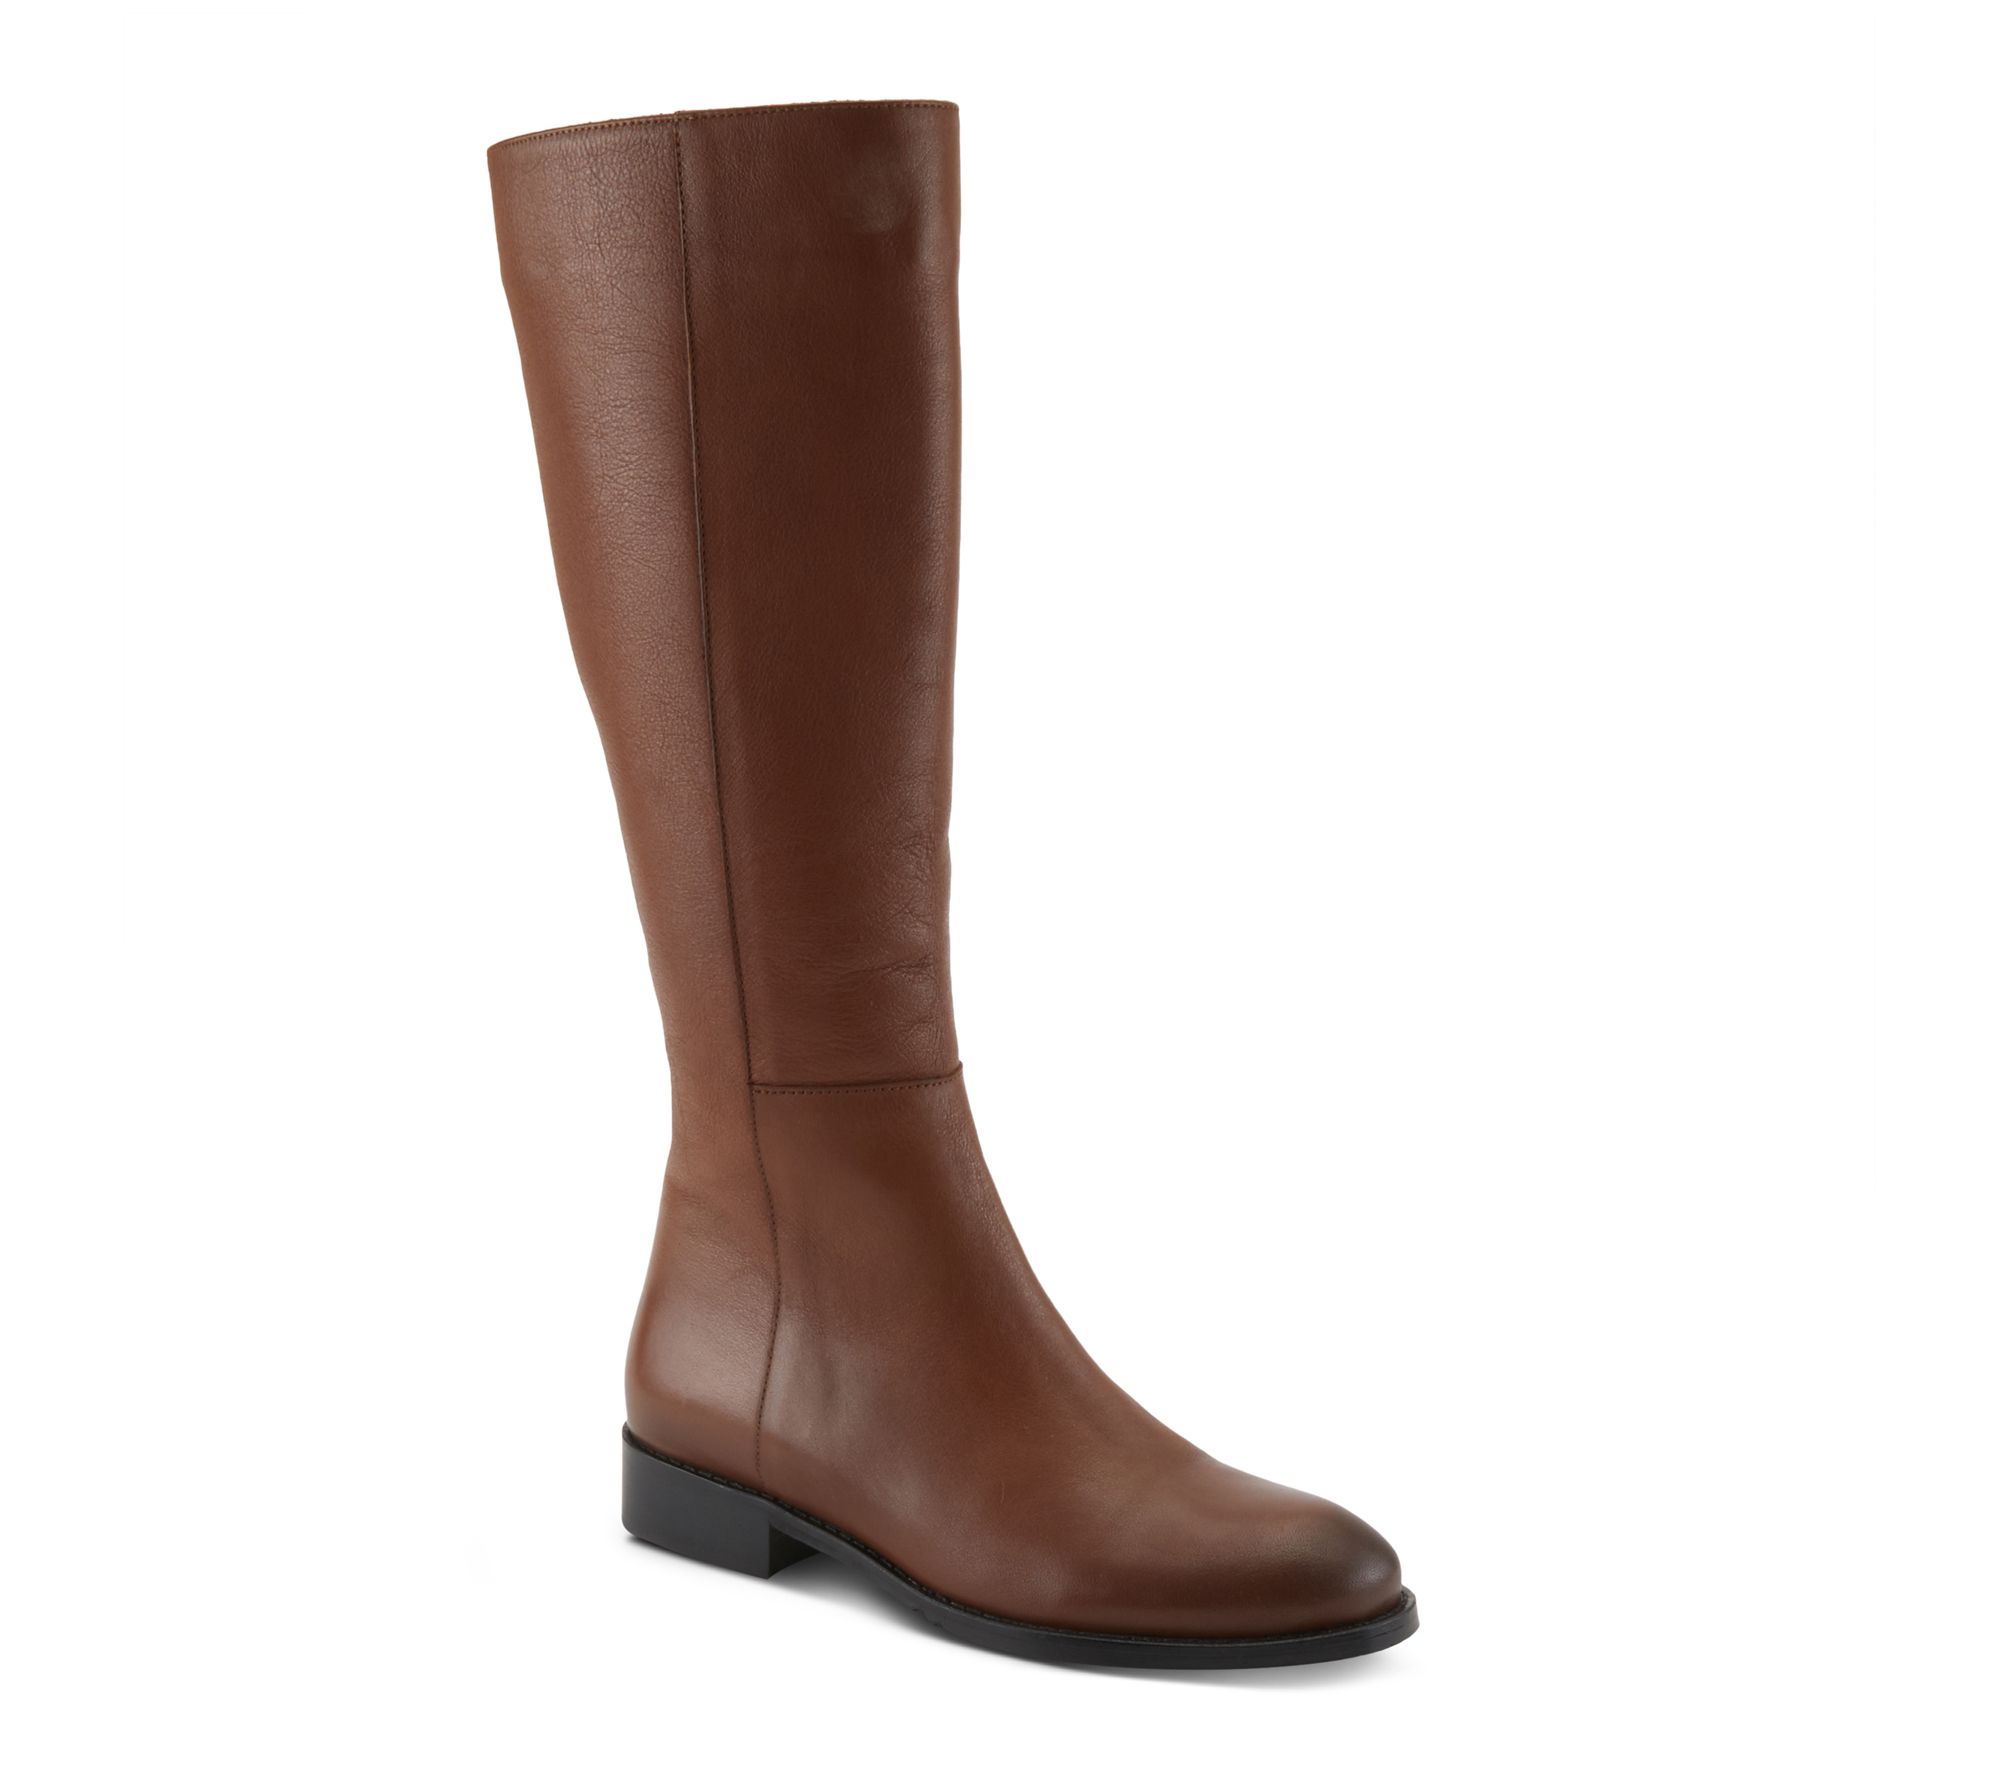 Spring Step Leather Knee-High Boots - Hightail - QVC.com